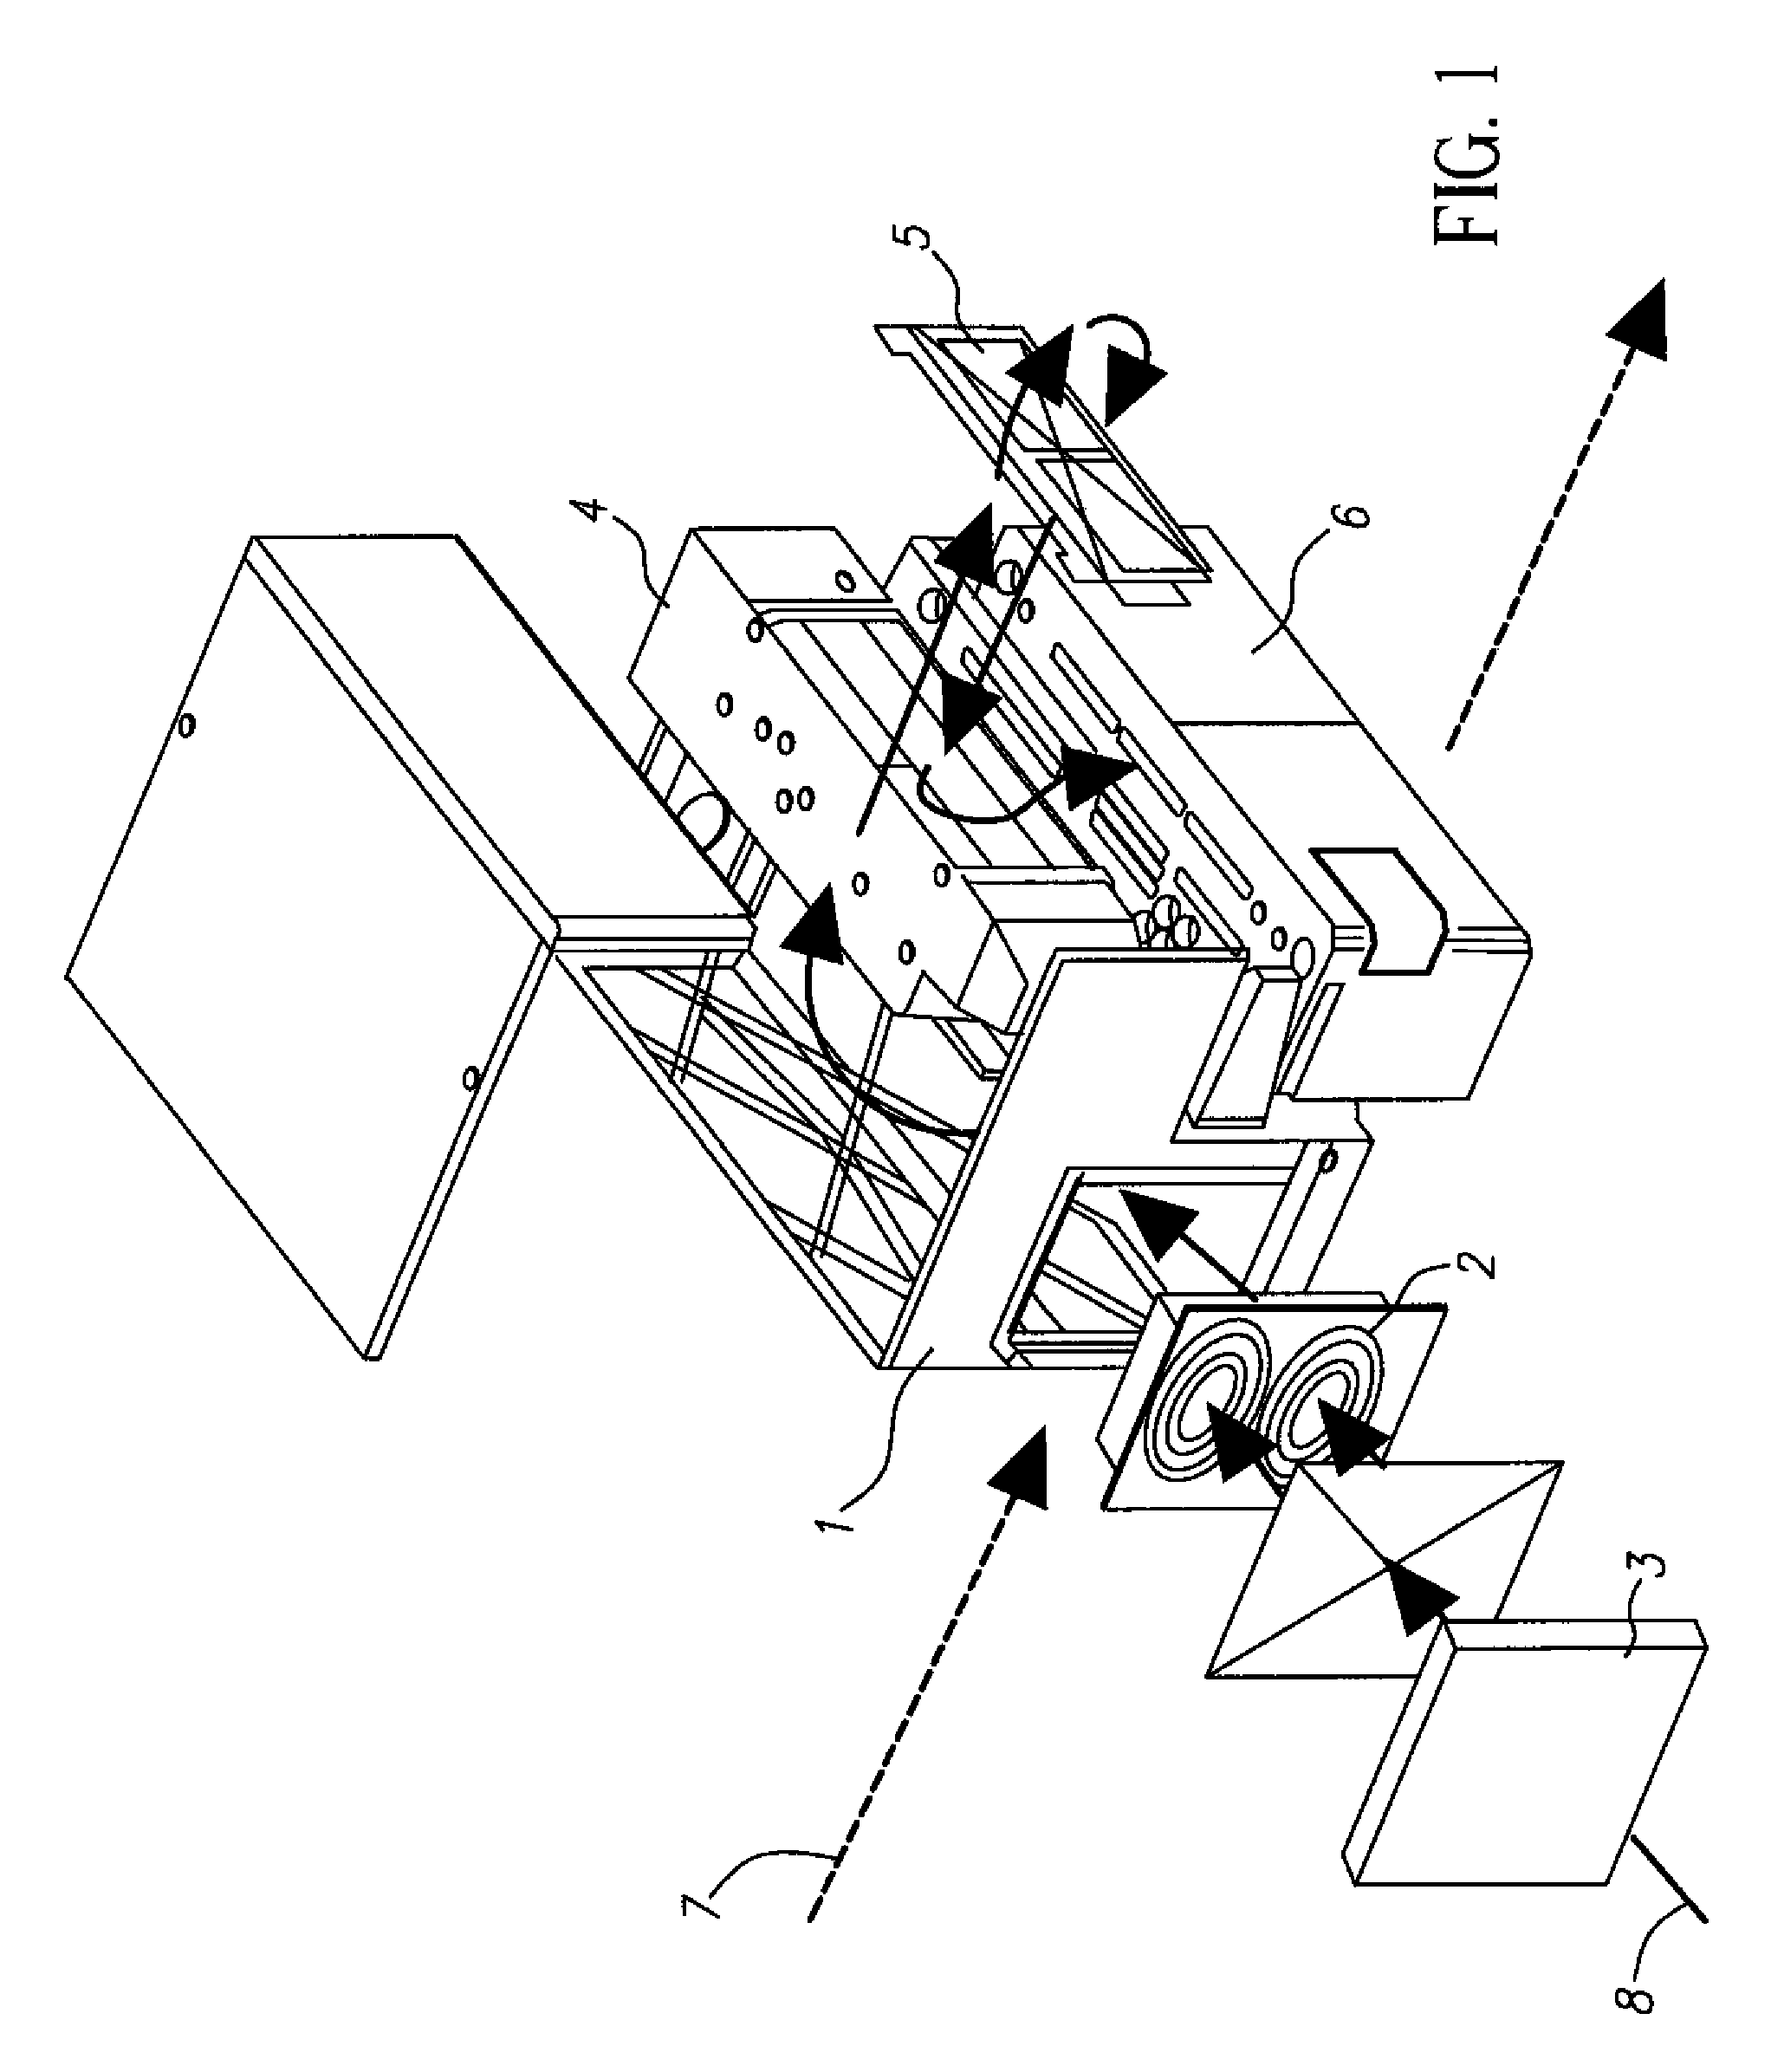 Reduction of turbulence within printing region of inkjet printer heads